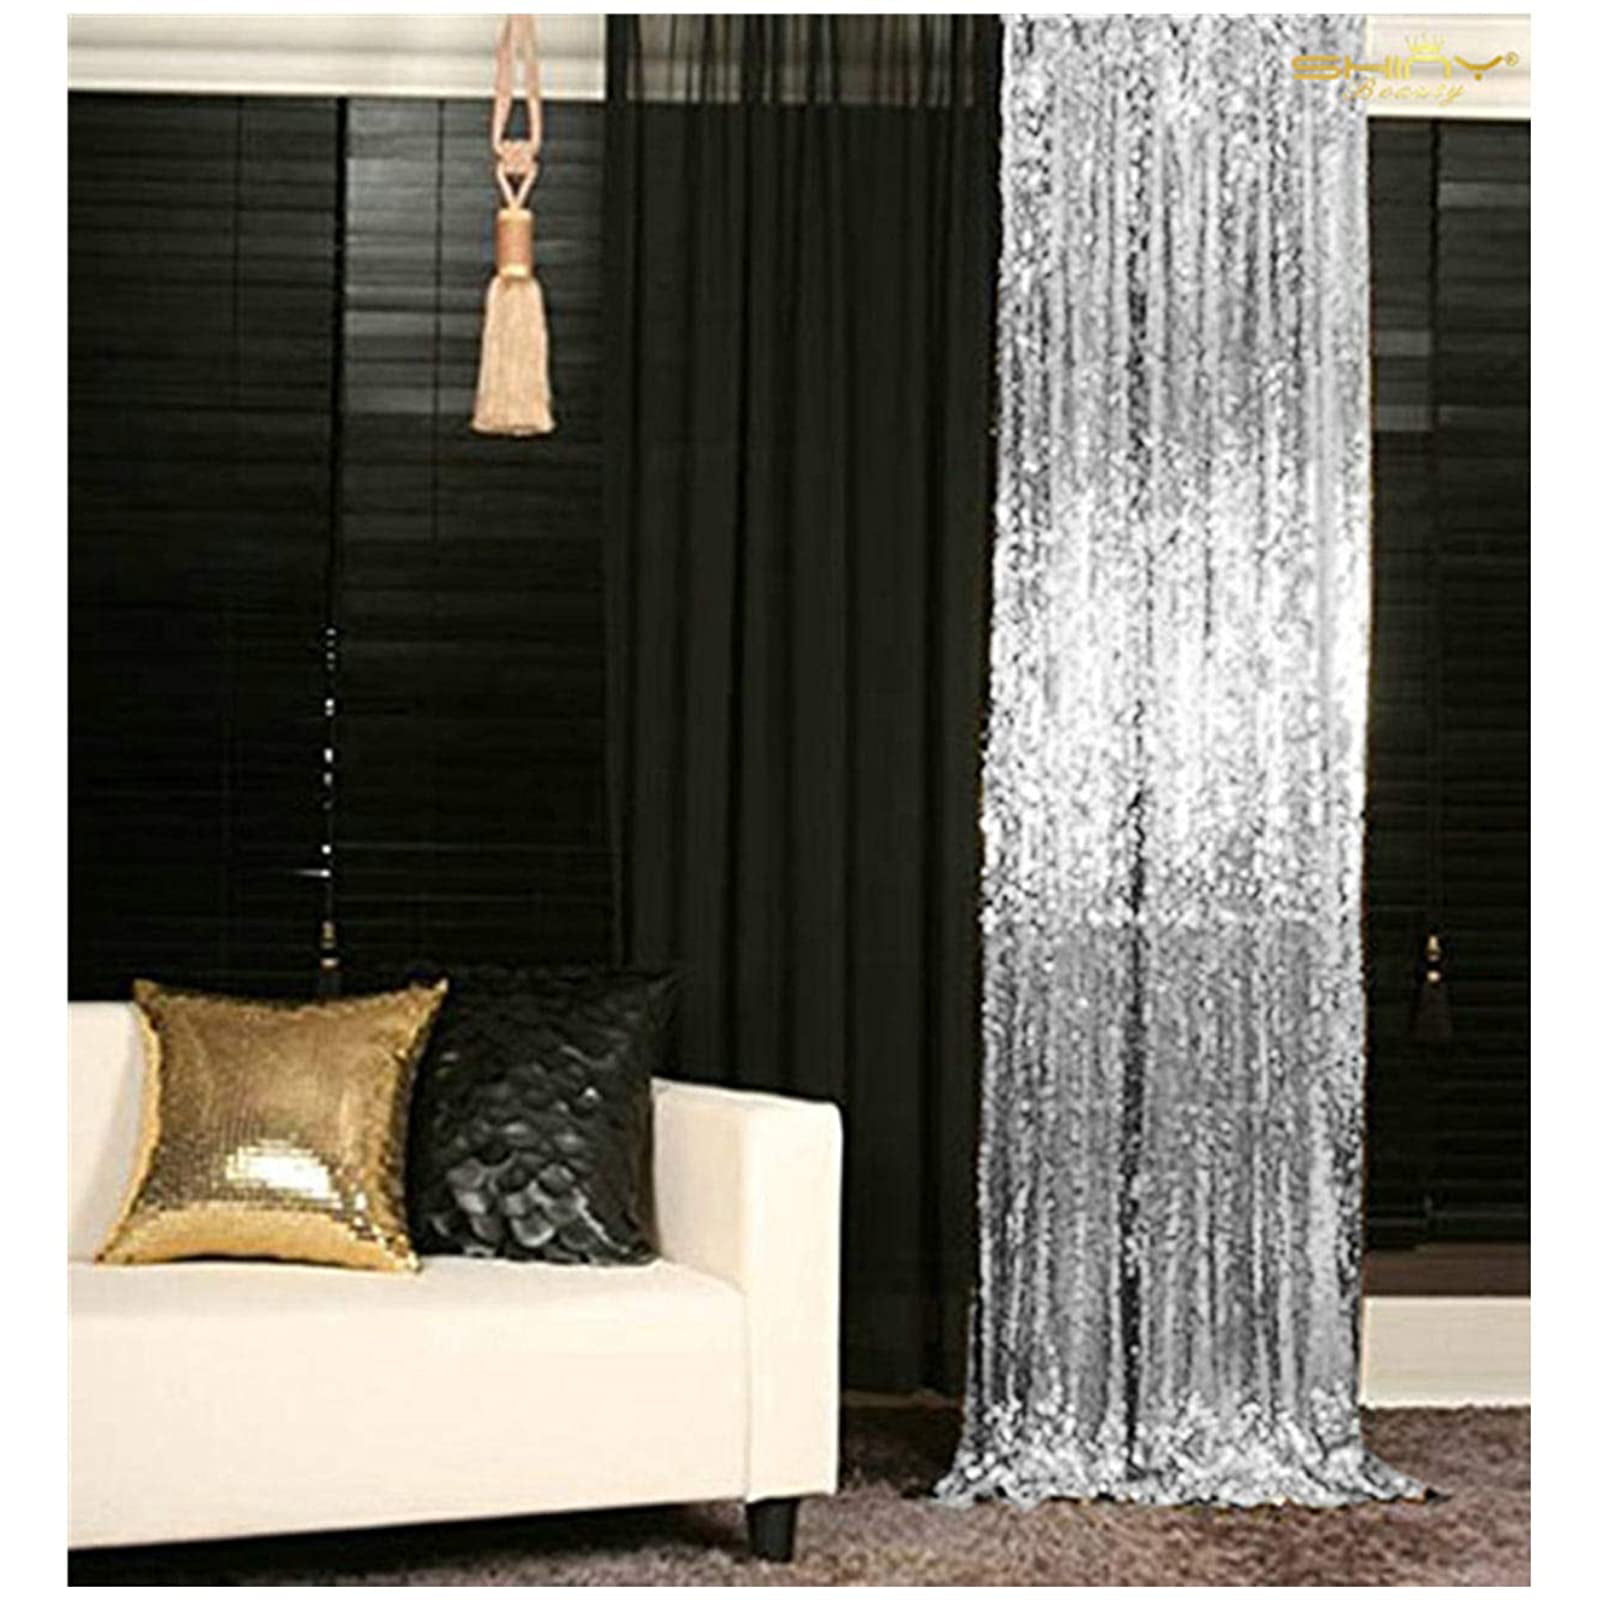 Shidianyi Silver Sequin Backdrop 2ftx8ft Sequin Photo Backdrop Photo Booth Background Sequence Christmas Backdrop Curtain Silver Walmart Com Walmart Com